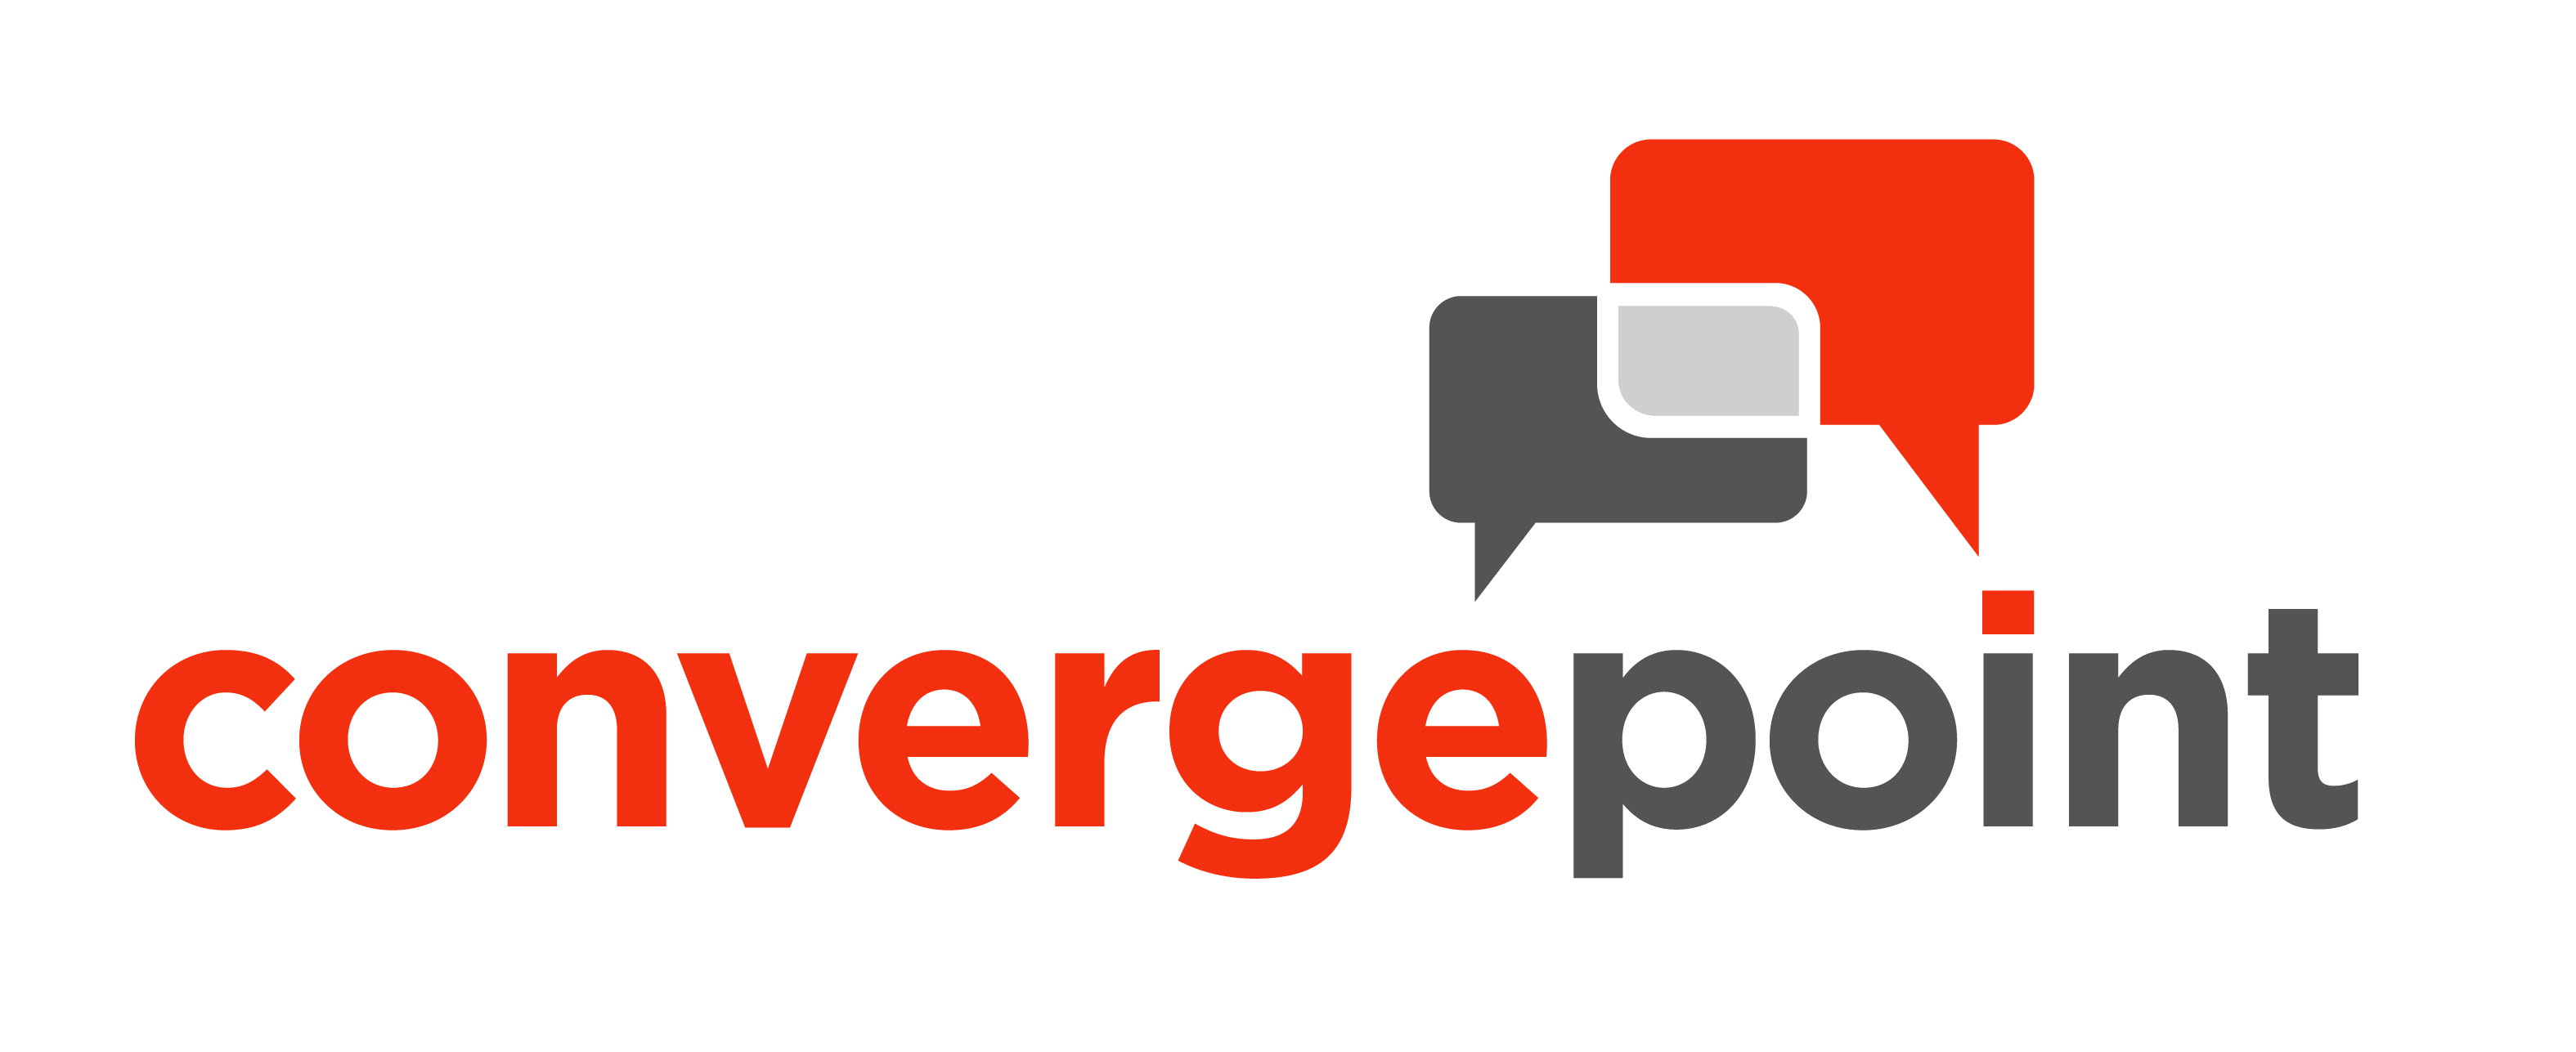 ConvergePoint Contract Management Software